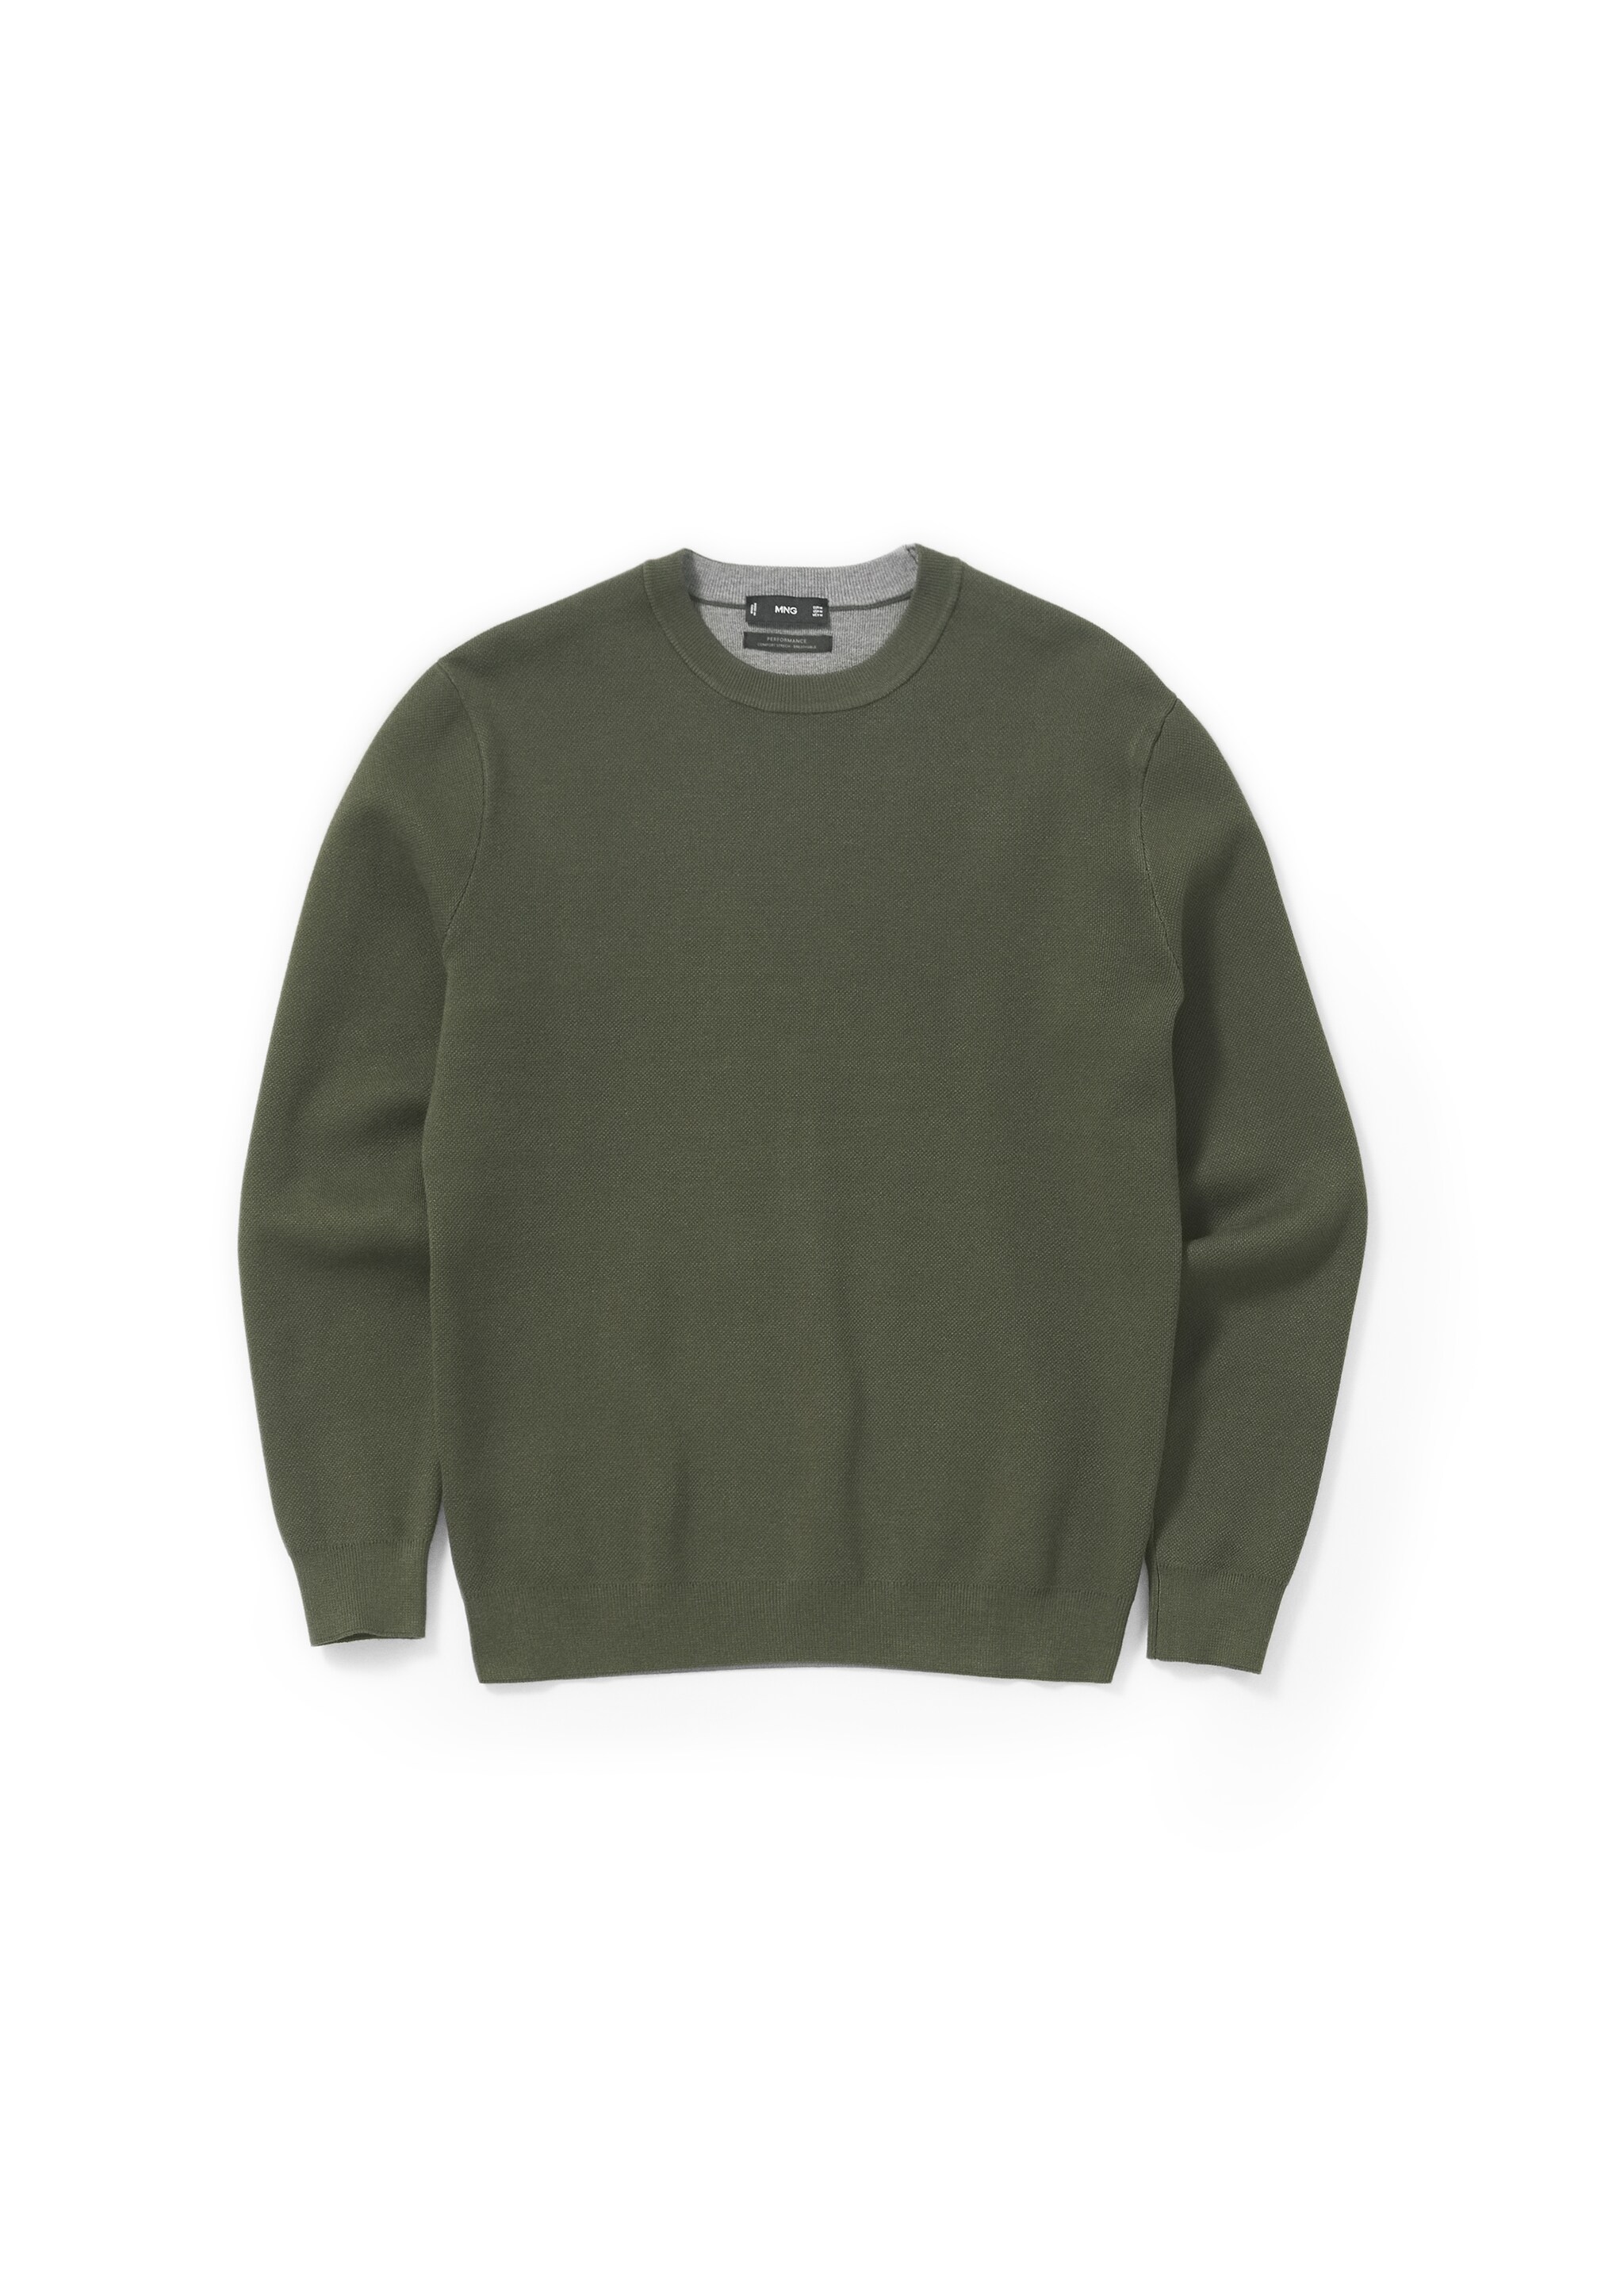 Round-neck breathable sweater - Details of the article 9